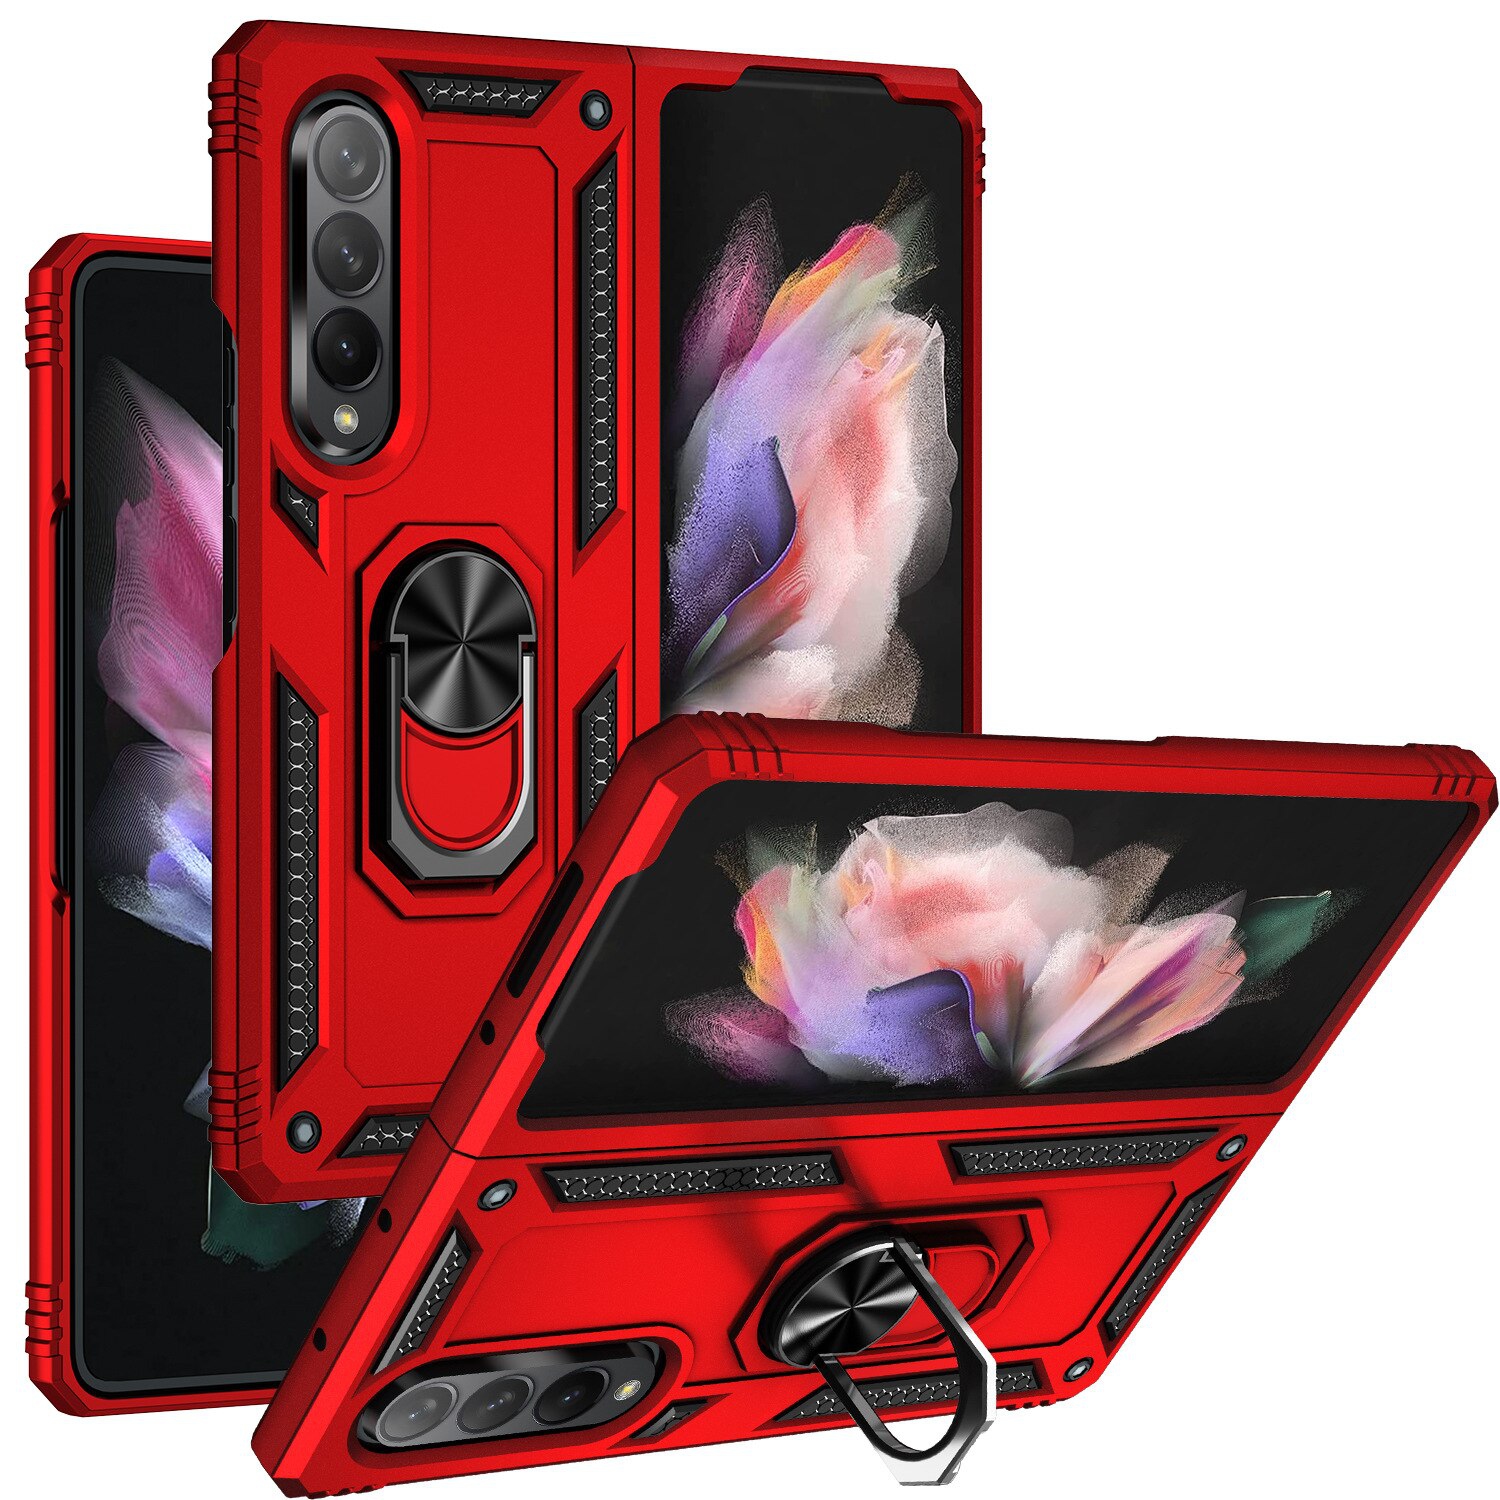 【CSmart】 Anti-Drop Hybrid Magnetic Hard Armor Case with Ring Holder for Samsung Galaxy Z Fold 3 5G, Red